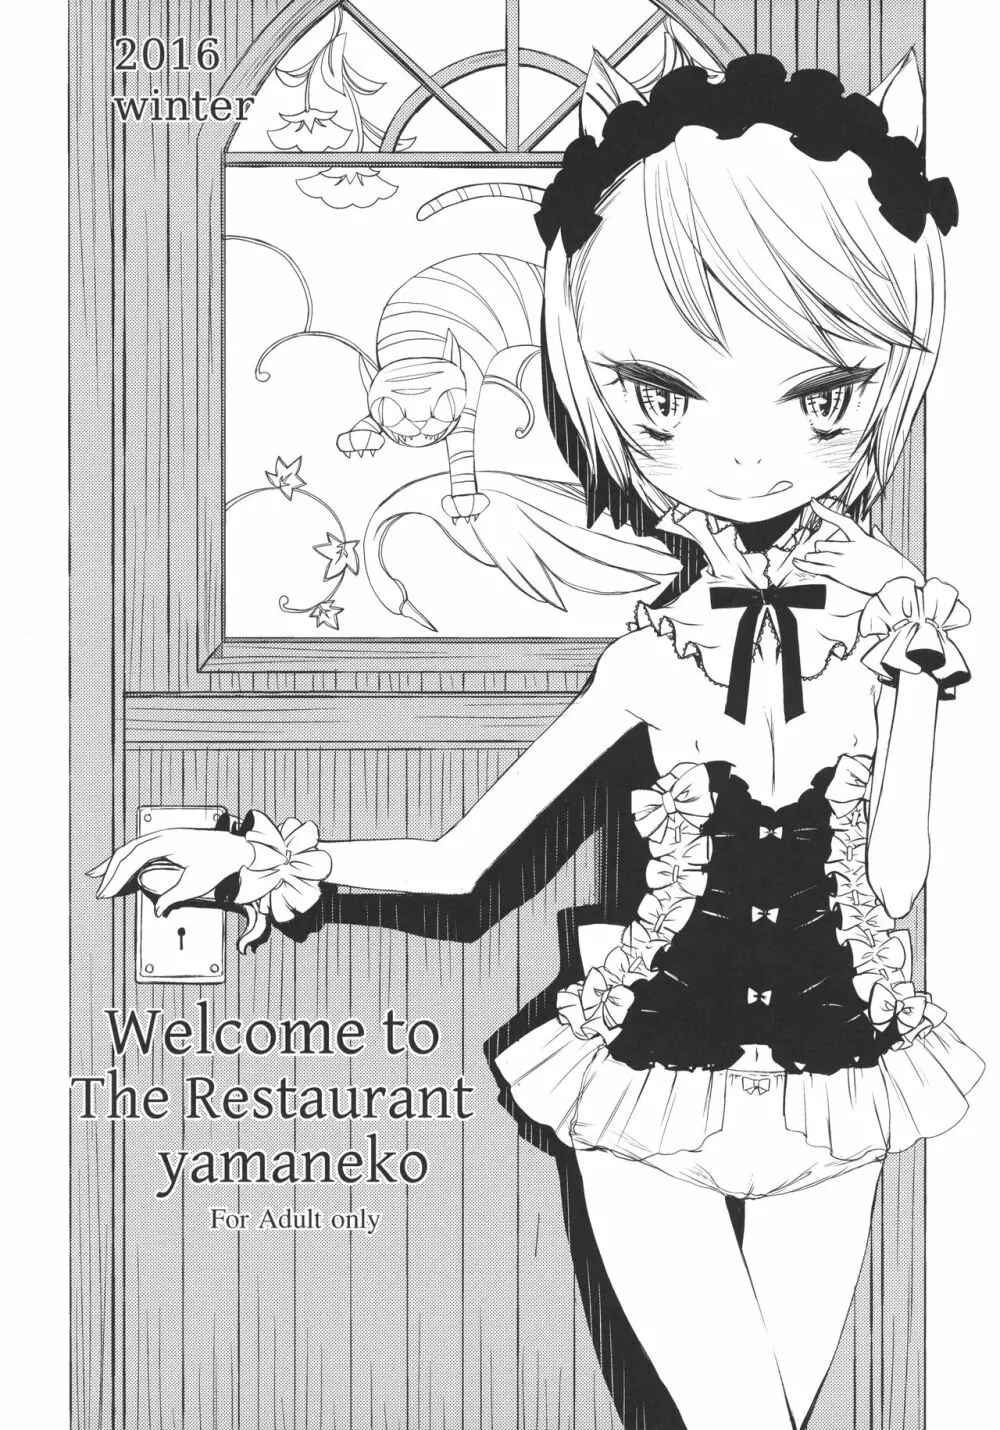 Welcome to The Restaurant yamaneko - page1